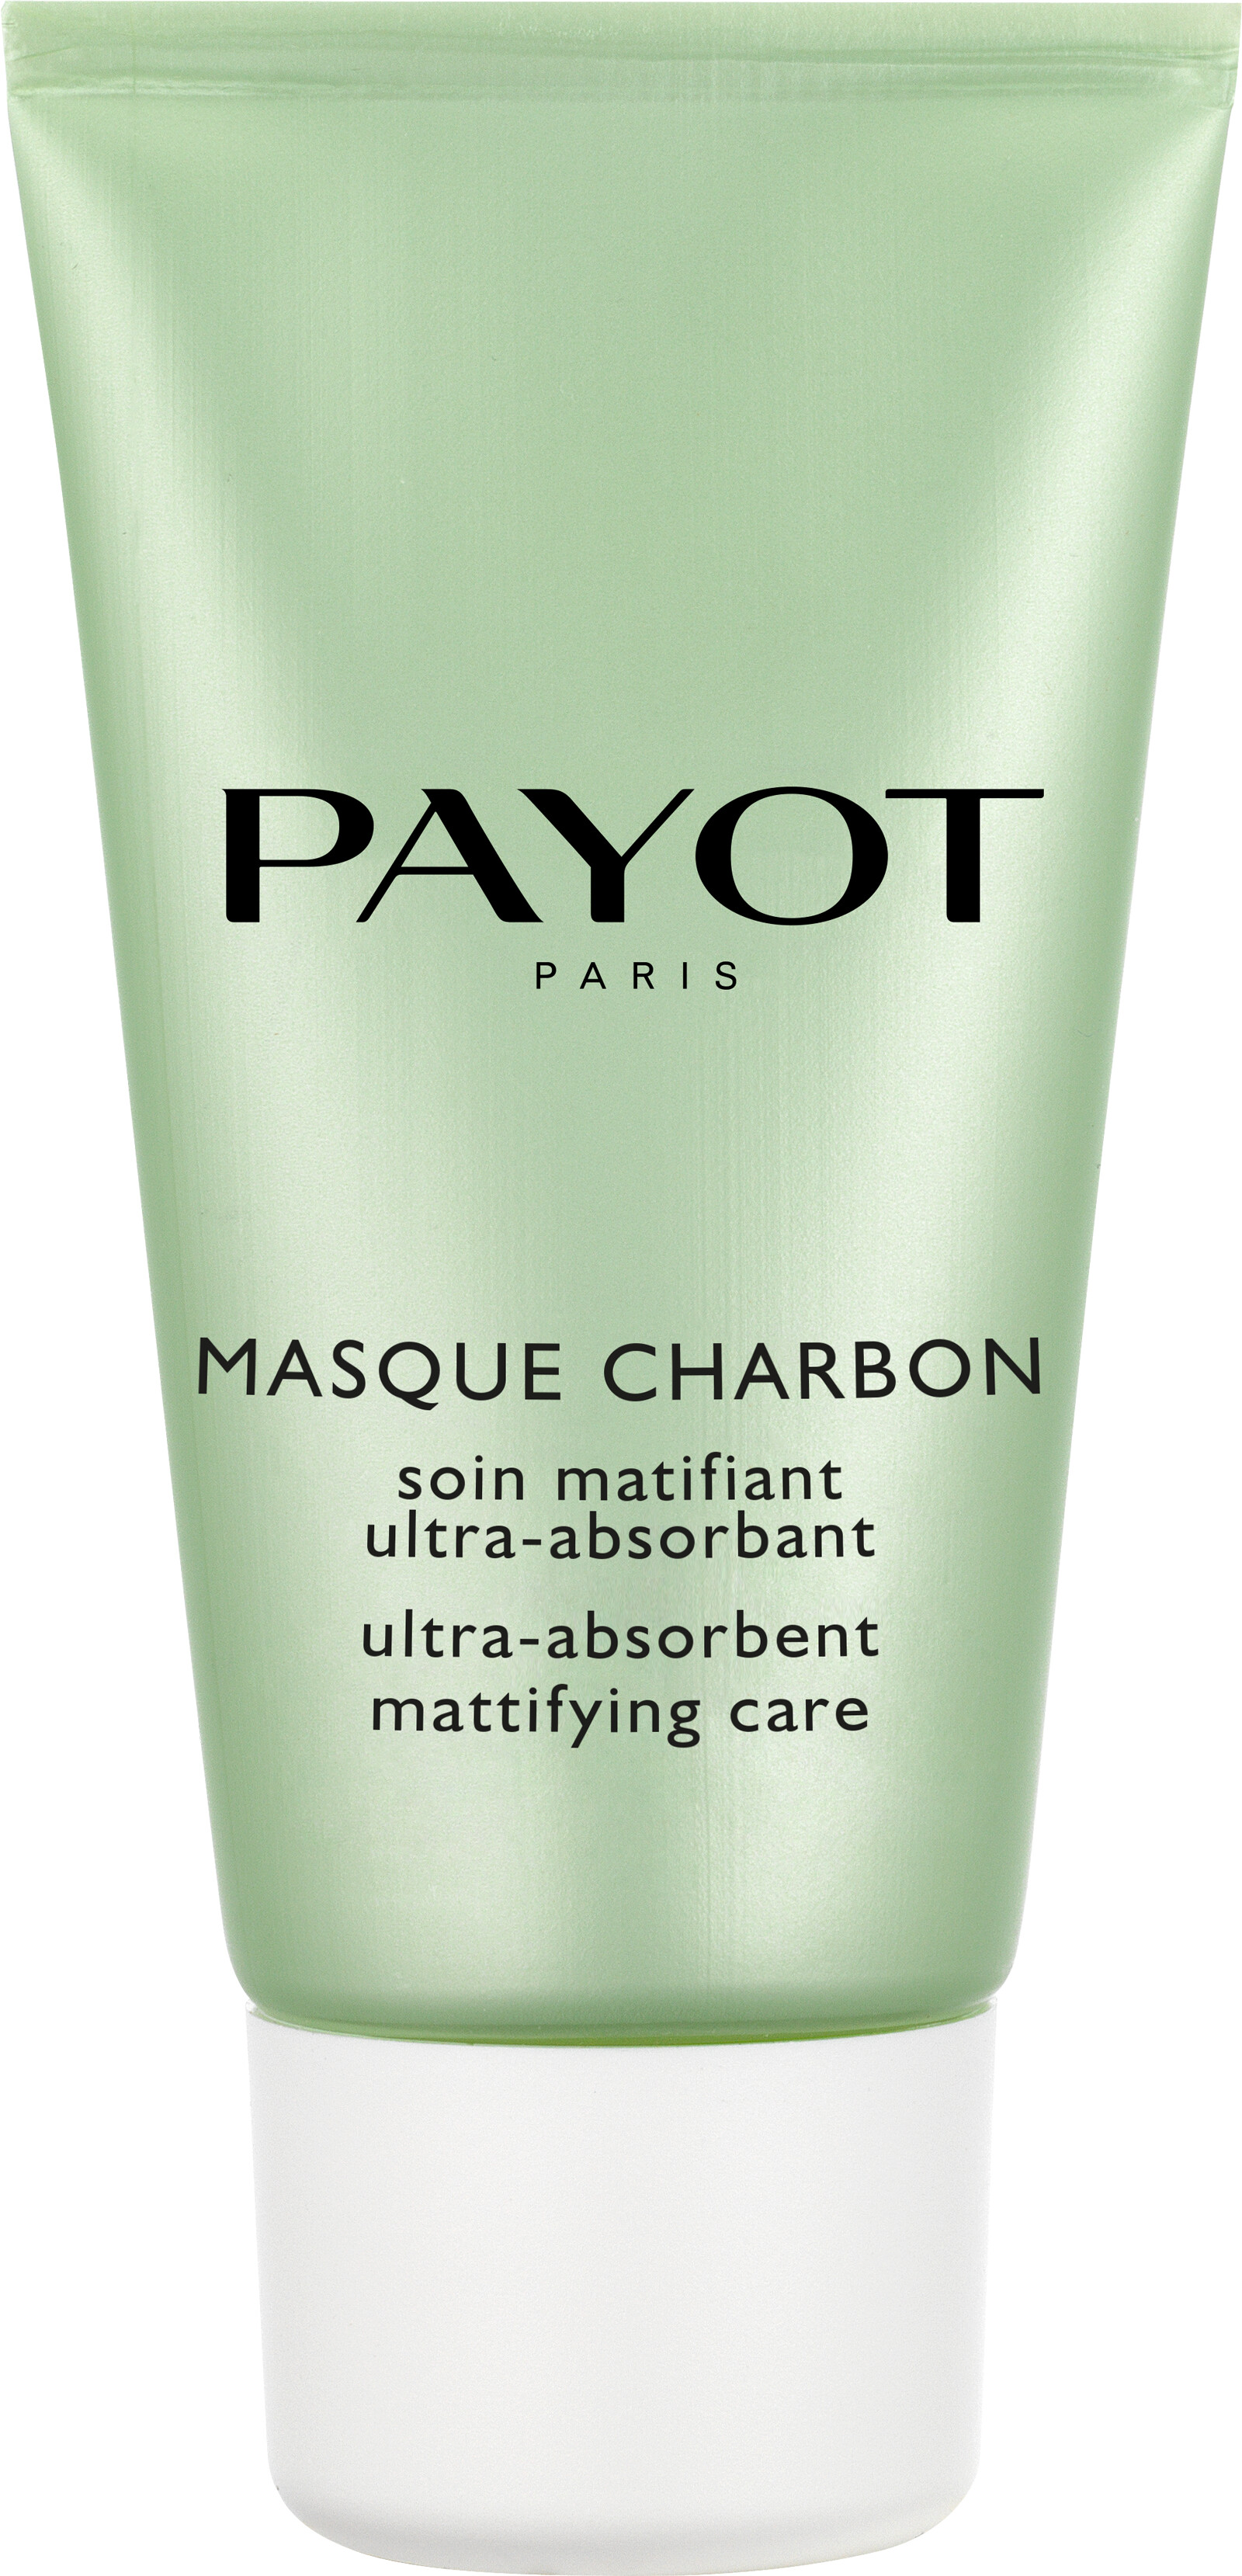 PAYOT Pate Grise Masque Charbon - Ultra Absorbent Mattifying Care 50ml